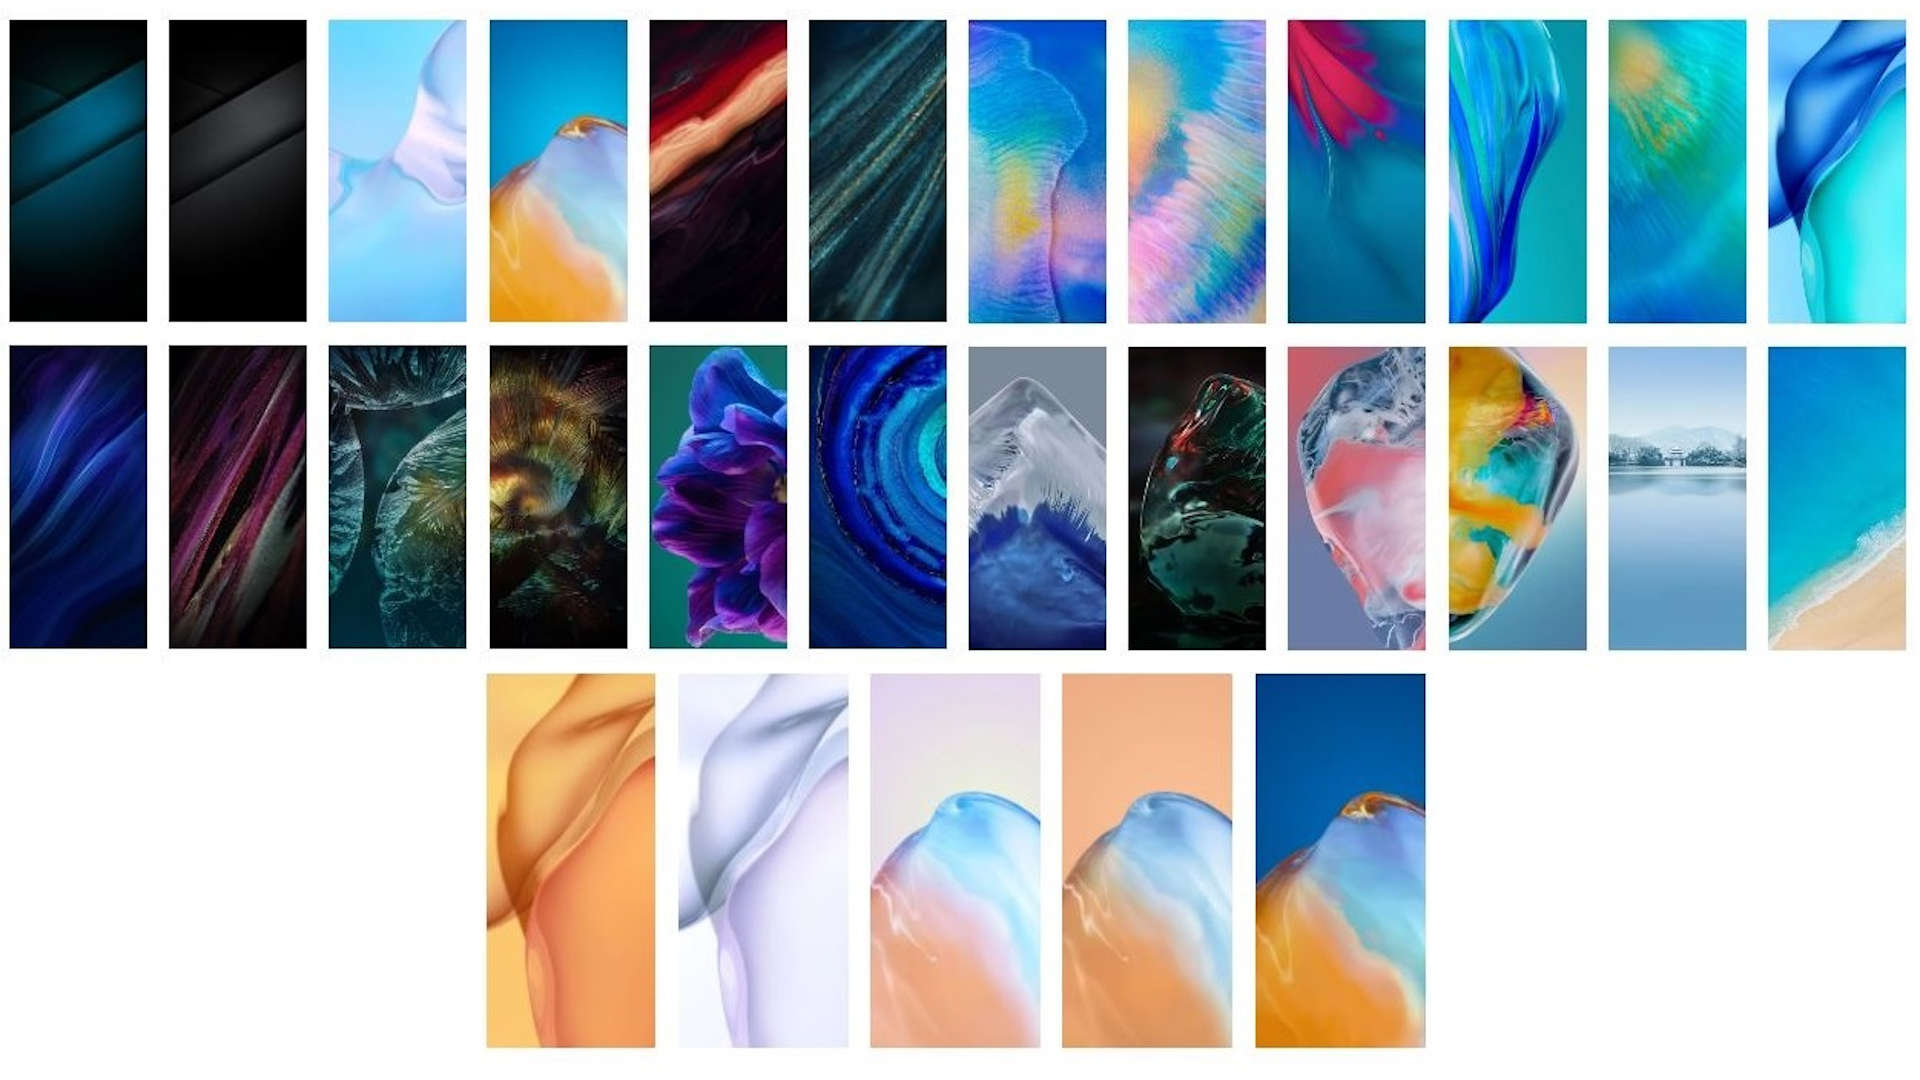 EMUI 11: download all the official wallpapers of Huawei | Download -  